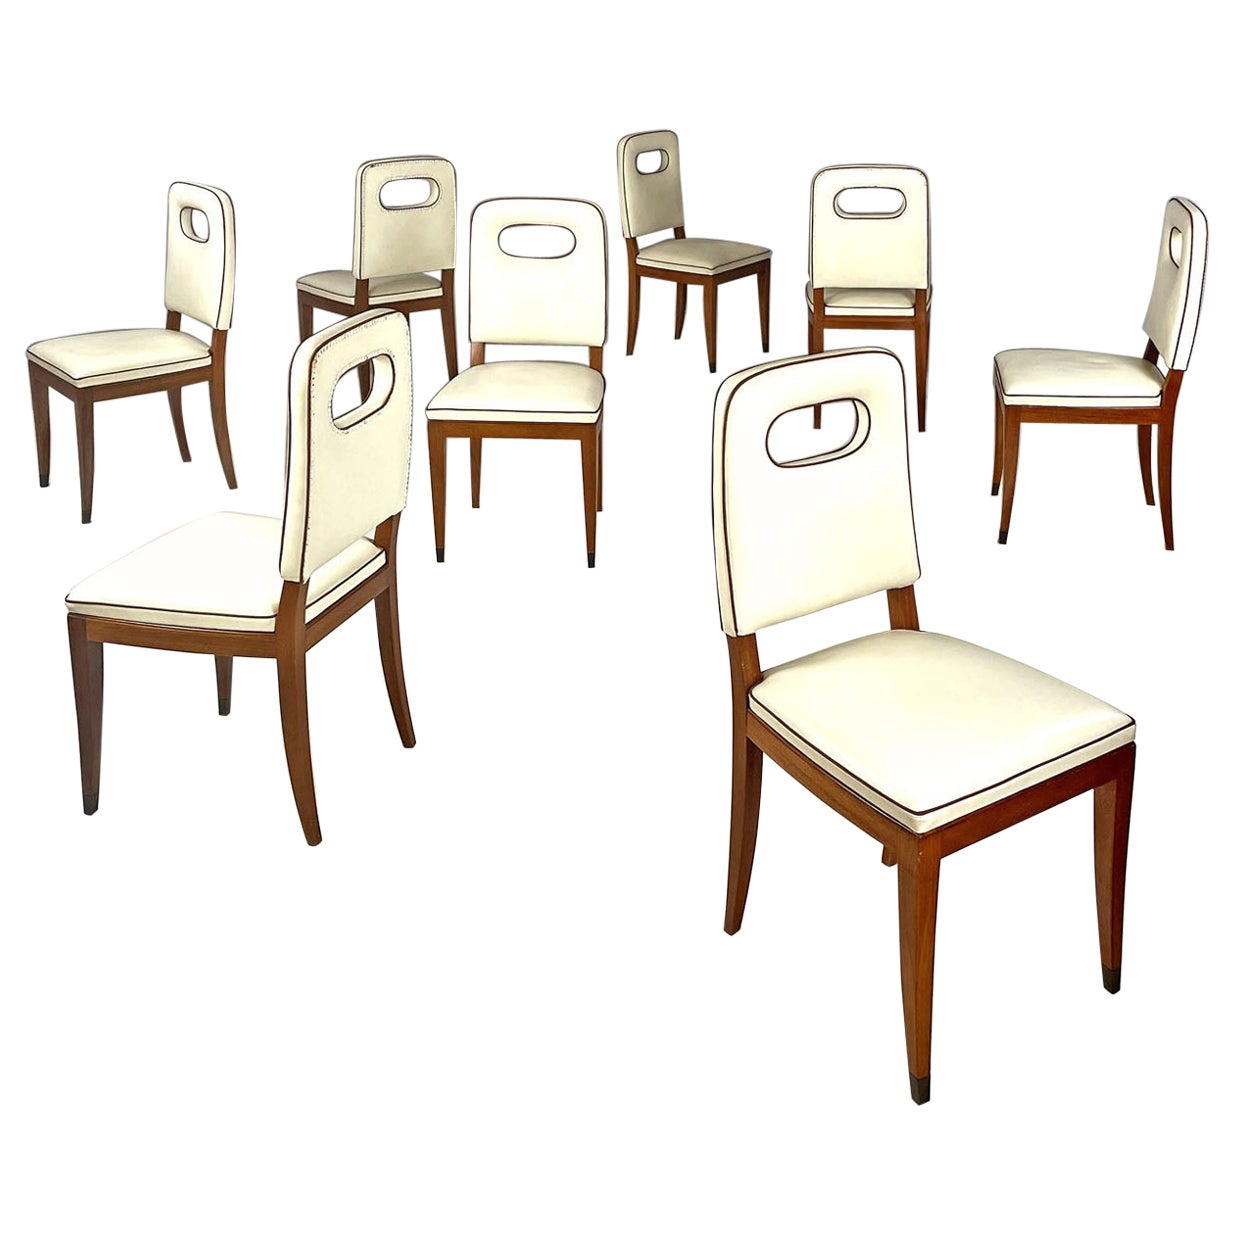 Italian Art Deco white leather and wood chairs by Giovanni Gariboldi, 1940s For Sale